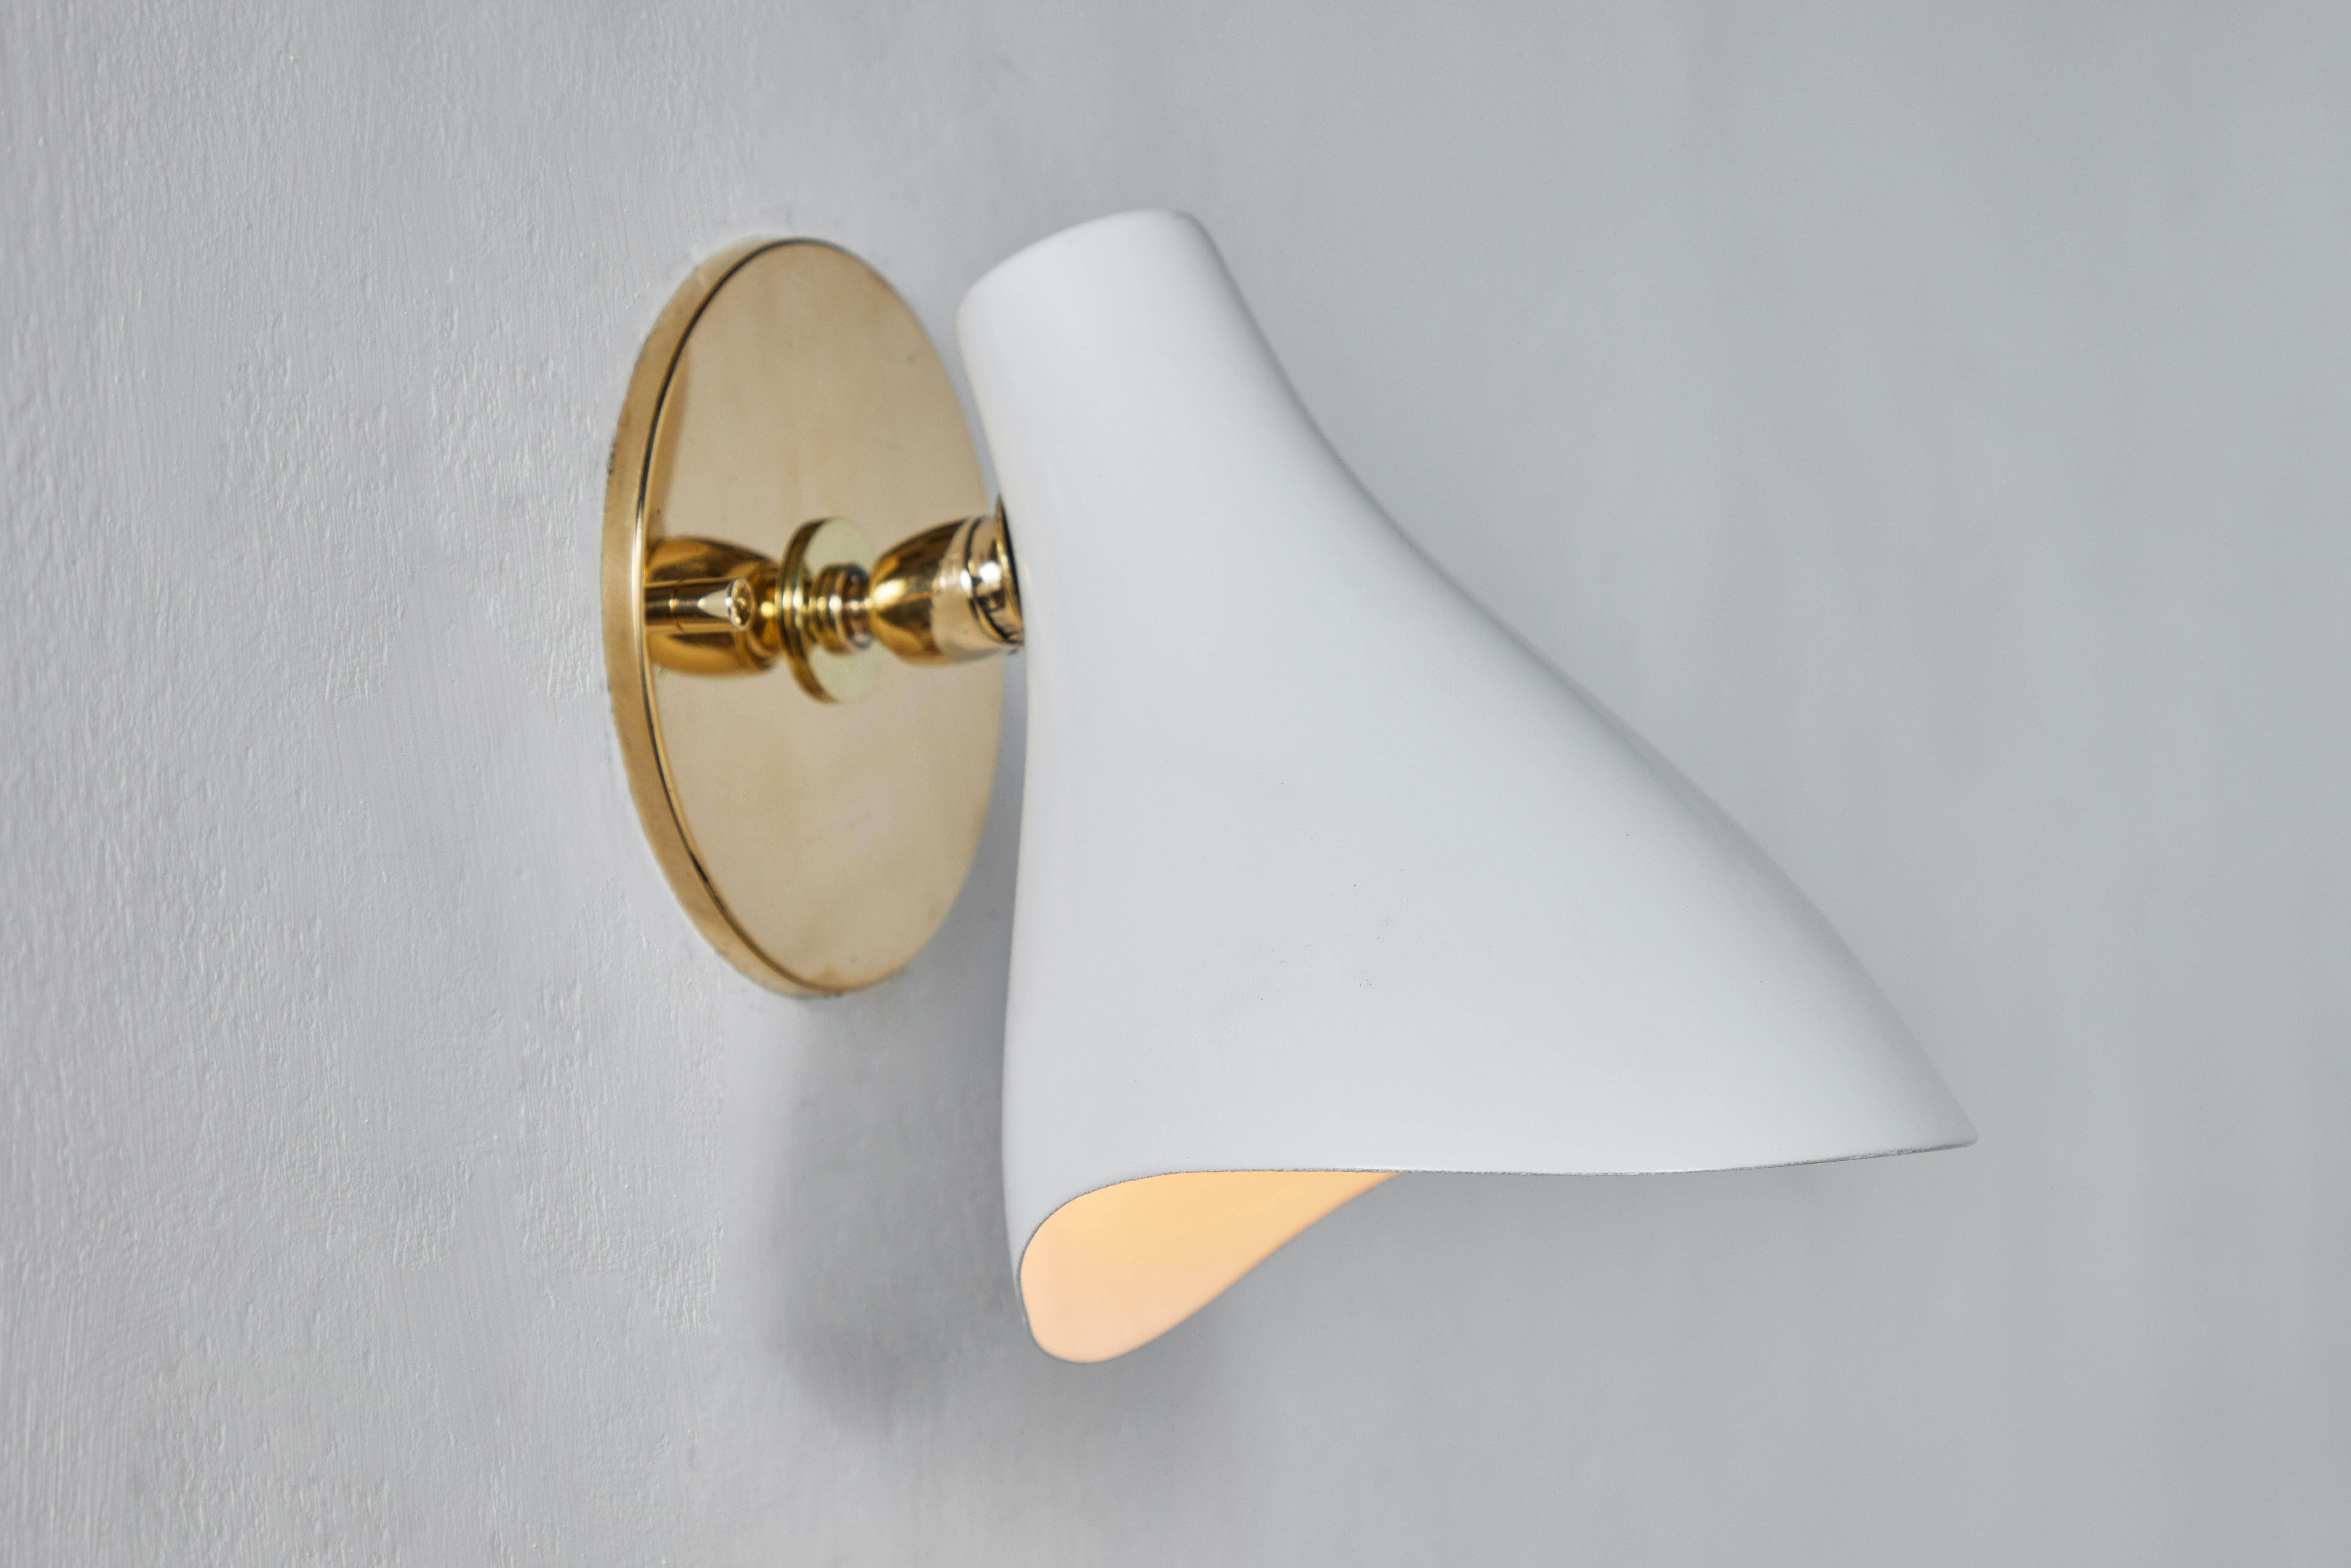 Pair of Gino Sarfatti Model #10 Sconces for Arteluce In Good Condition For Sale In Glendale, CA